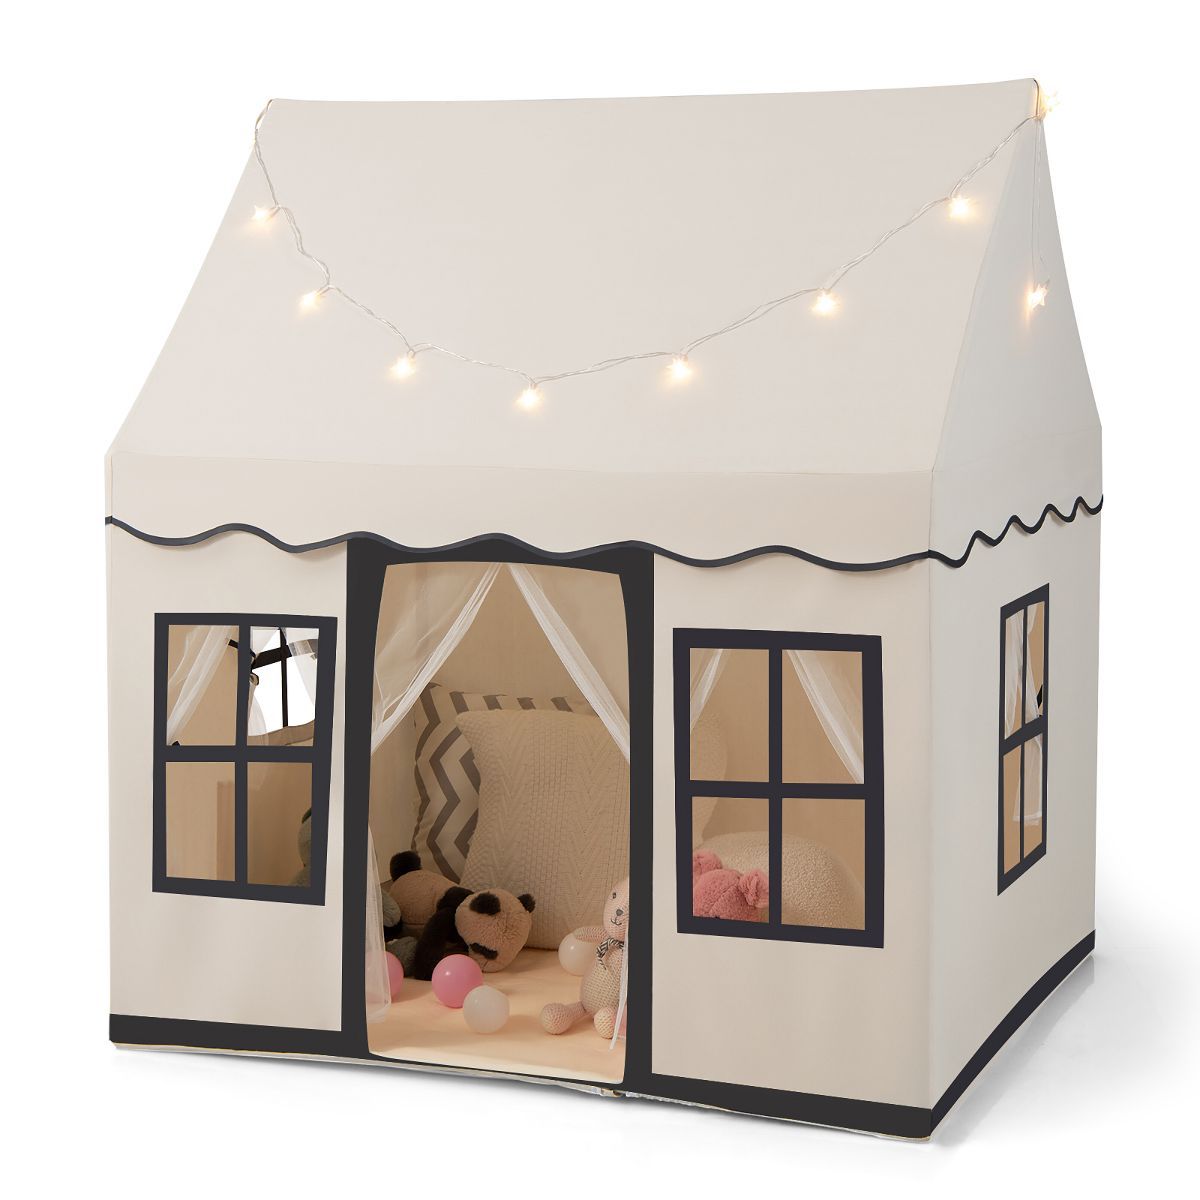 Costway Kids Play Castle Tent Large Playhouse Toys Gifts w/ Star Lights Washable Mat | Target